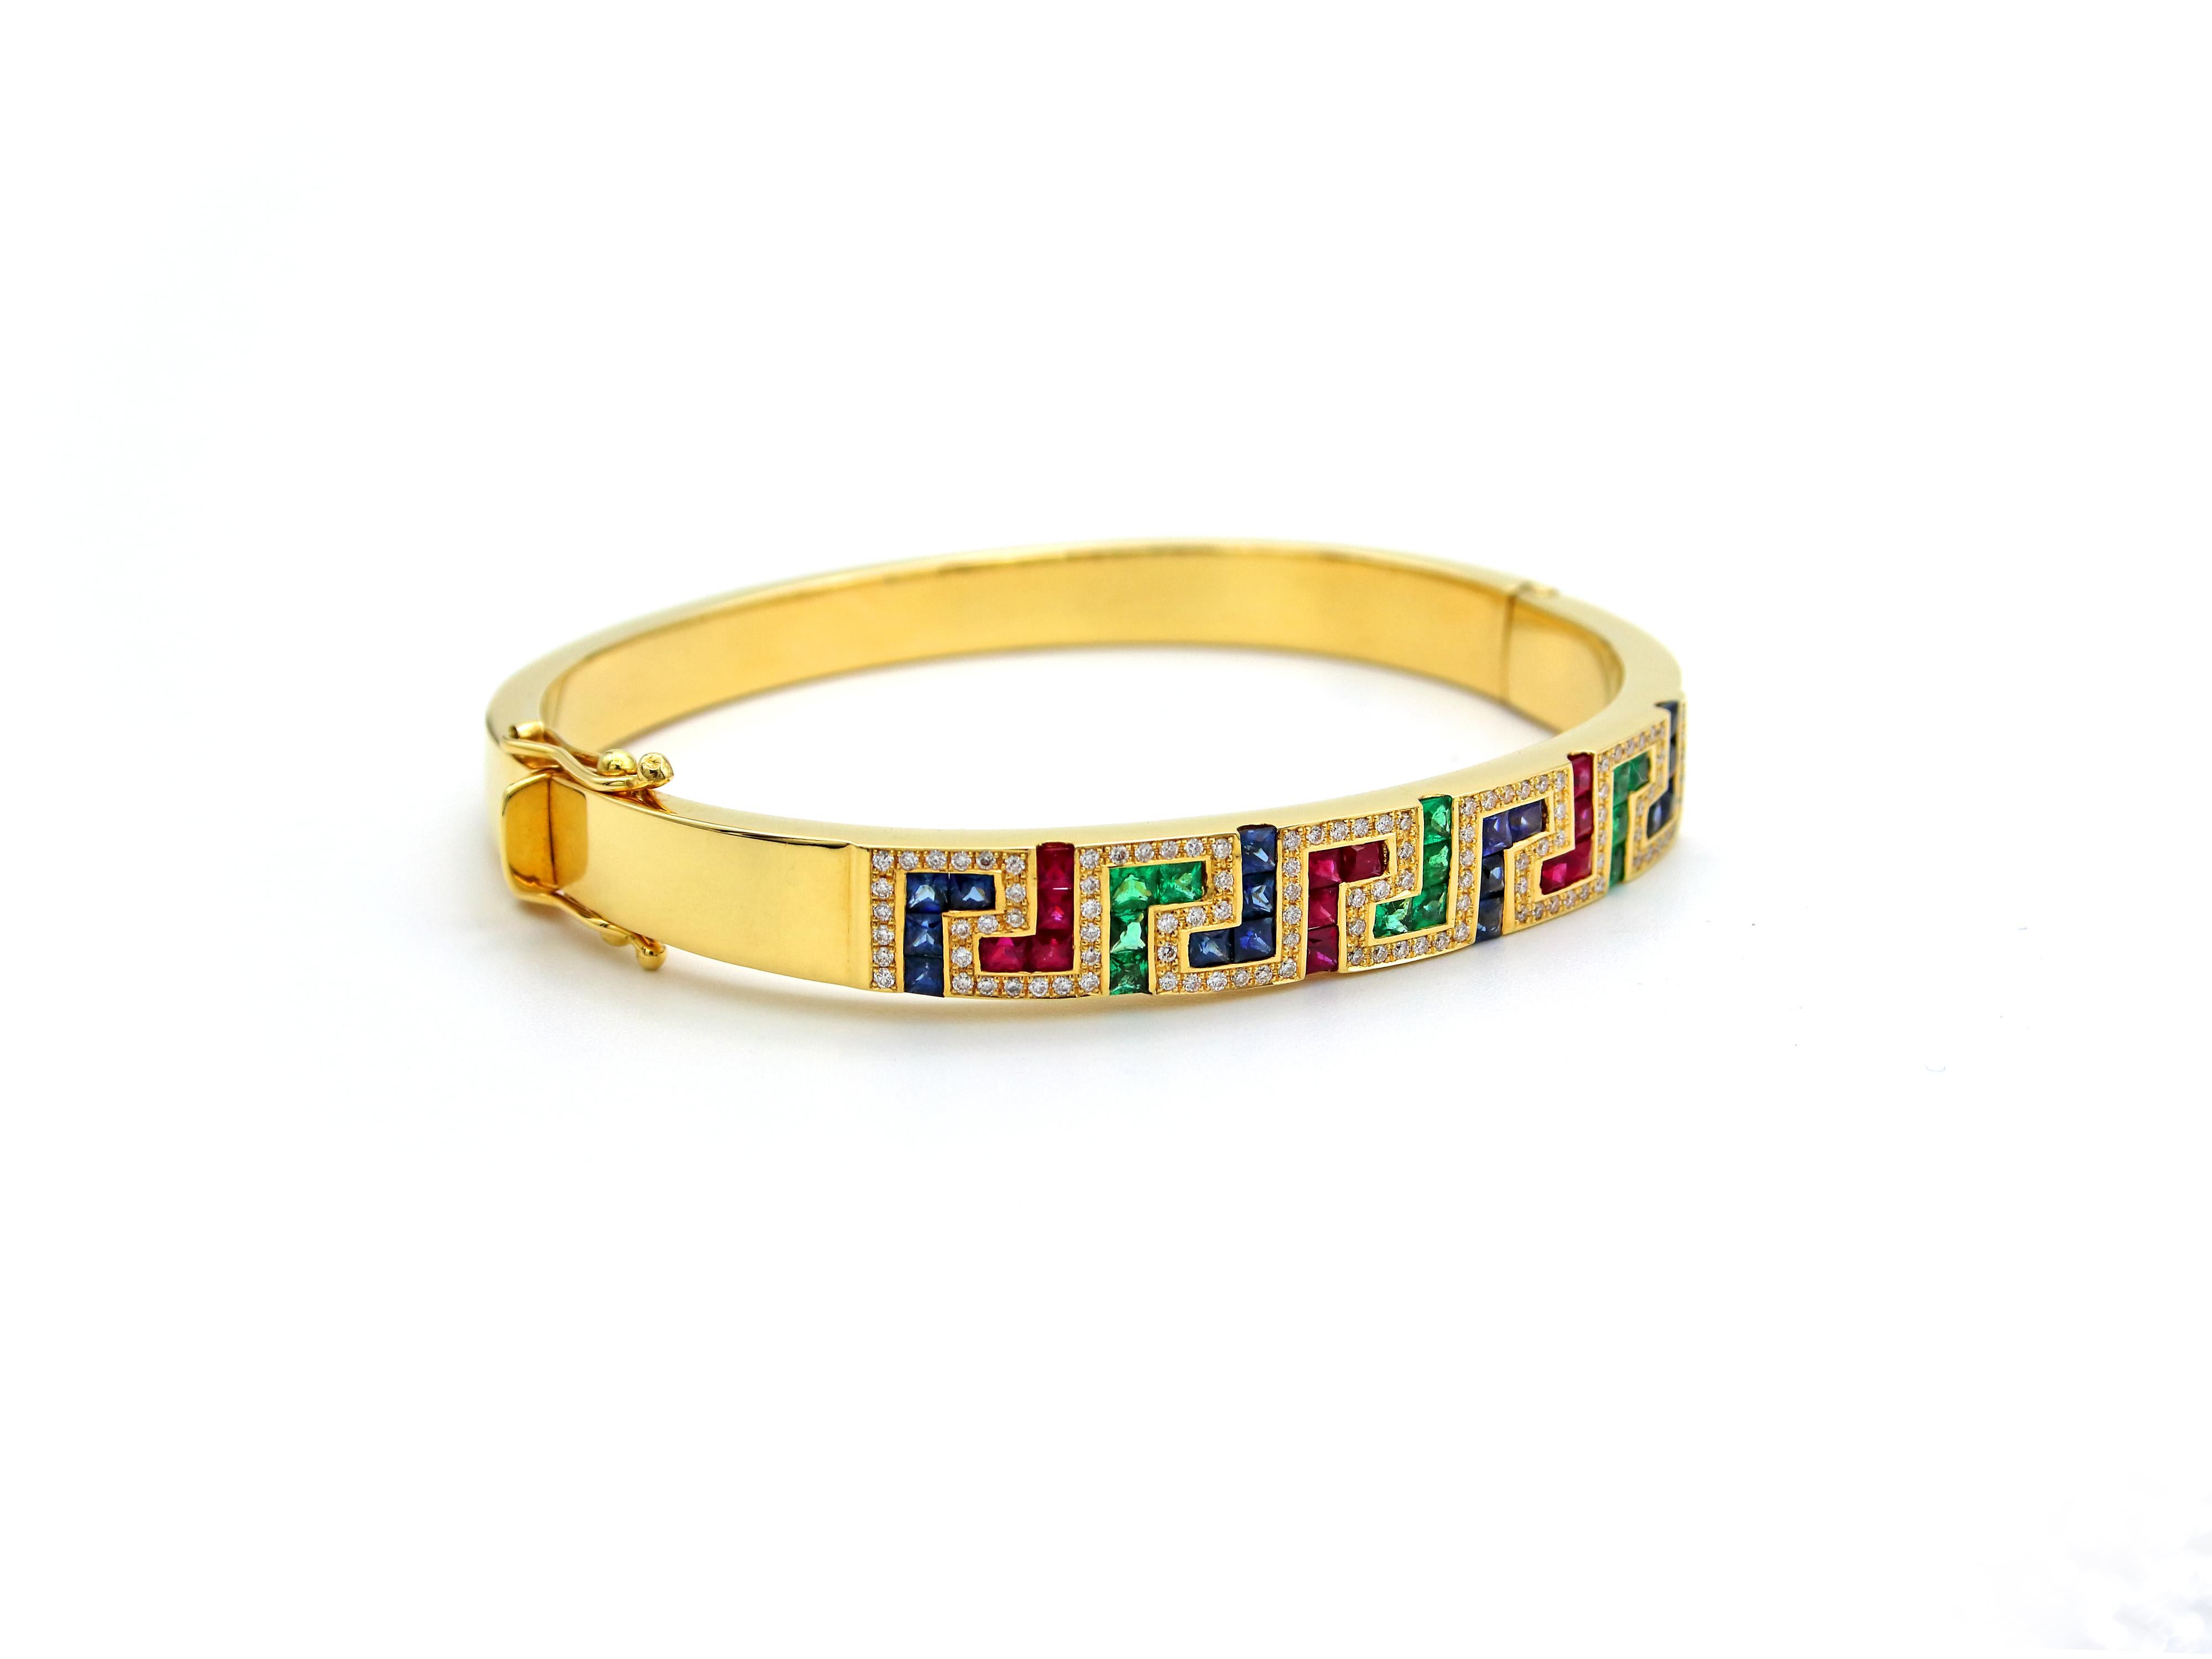 Happy Greek key collection. This bracelet in 18 karats yellow gold it’s one of the most recognizable designs worldwide. Recognizable for its Greek origin but also known as the symbol of the long life. The technical name of it is Meander. Known as